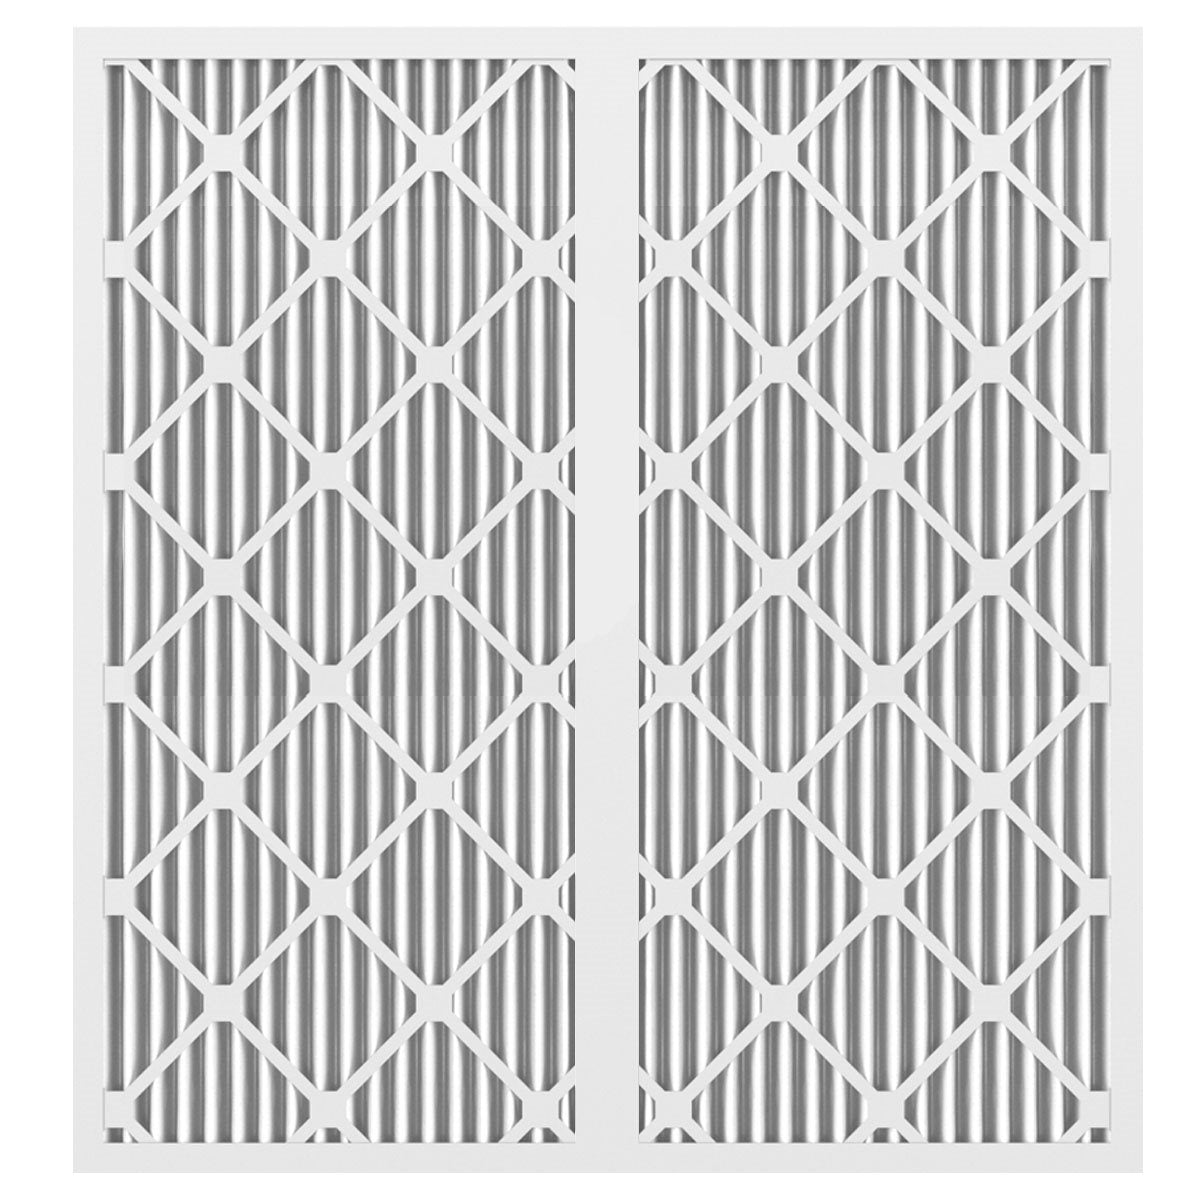 Product Secondary Image:Replacement Filters for Anden Dehumidifiers (x6)